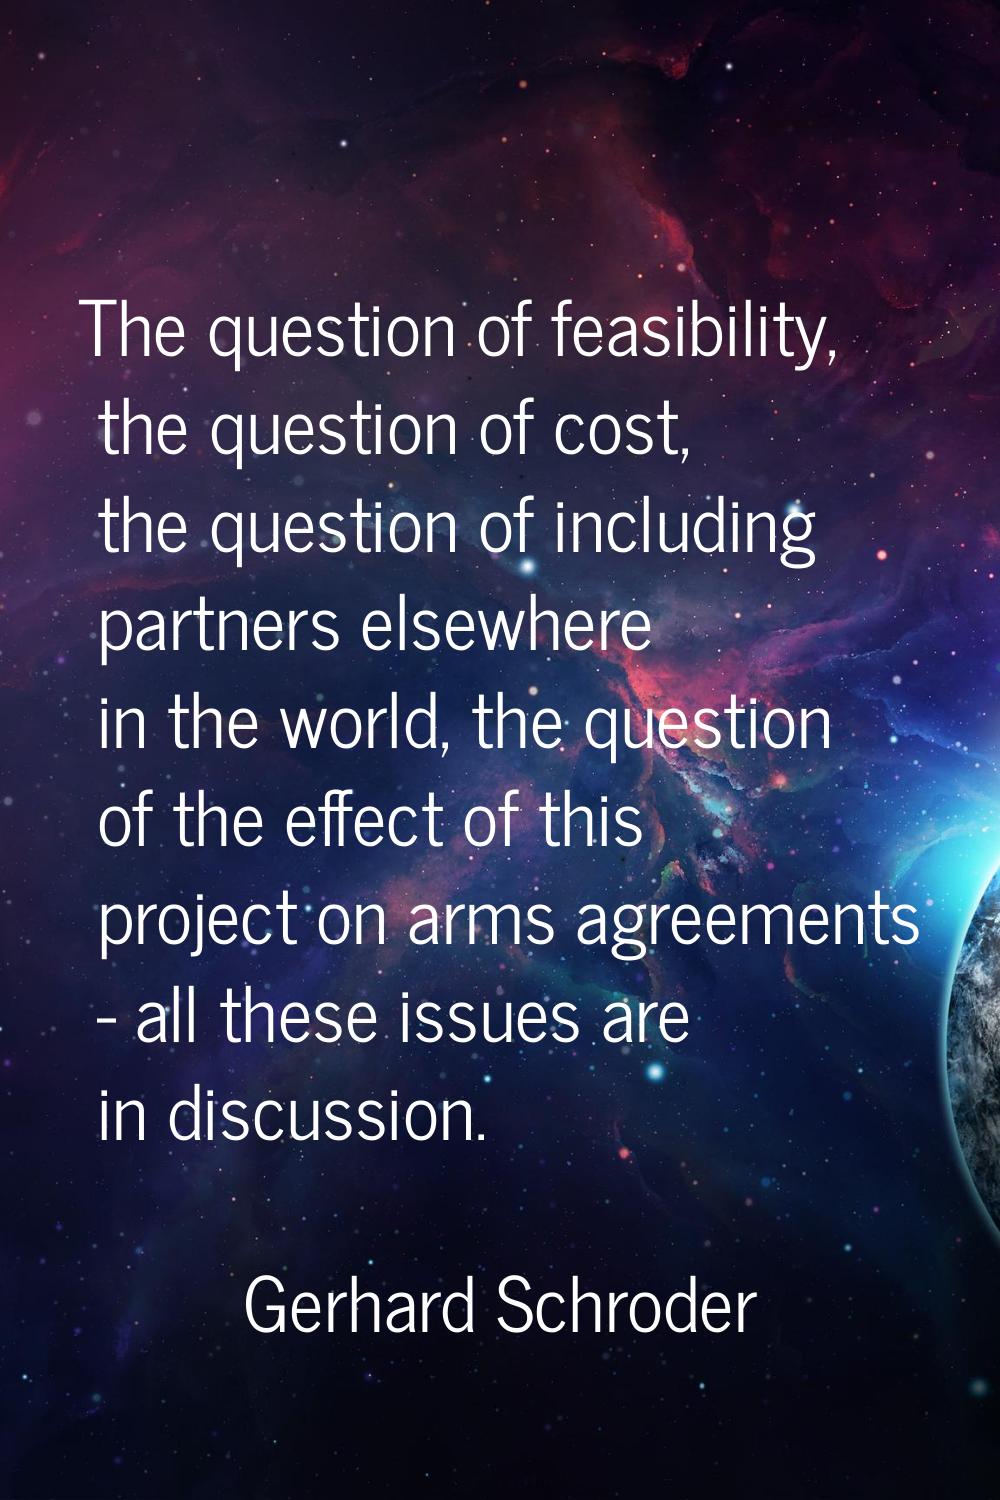 The question of feasibility, the question of cost, the question of including partners elsewhere in 